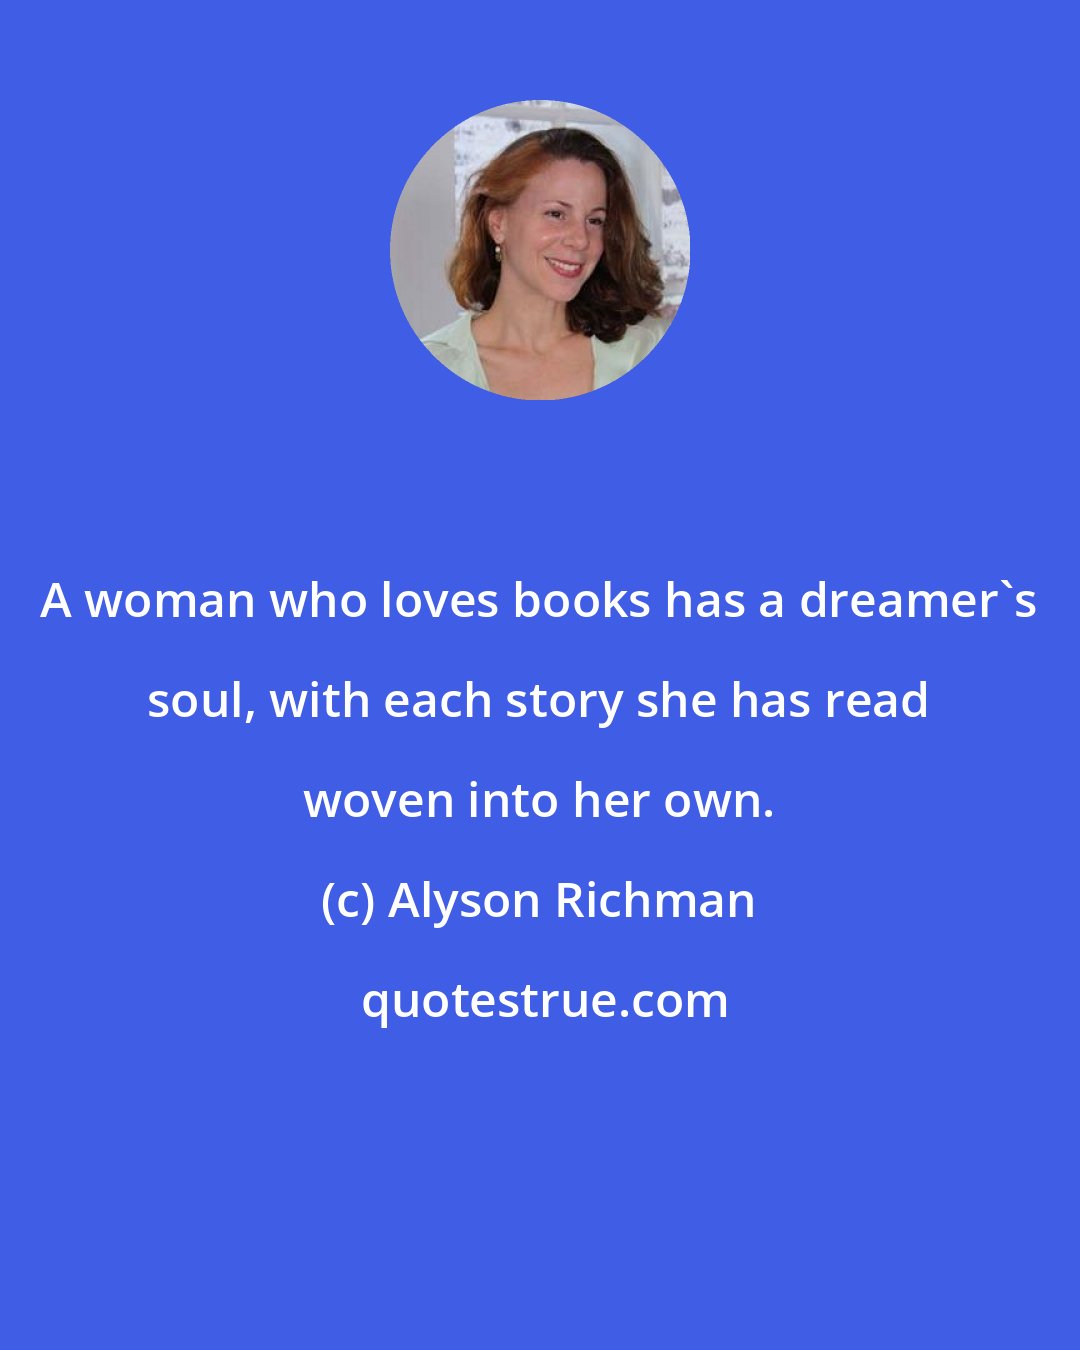 Alyson Richman: A woman who loves books has a dreamer's soul, with each story she has read woven into her own.